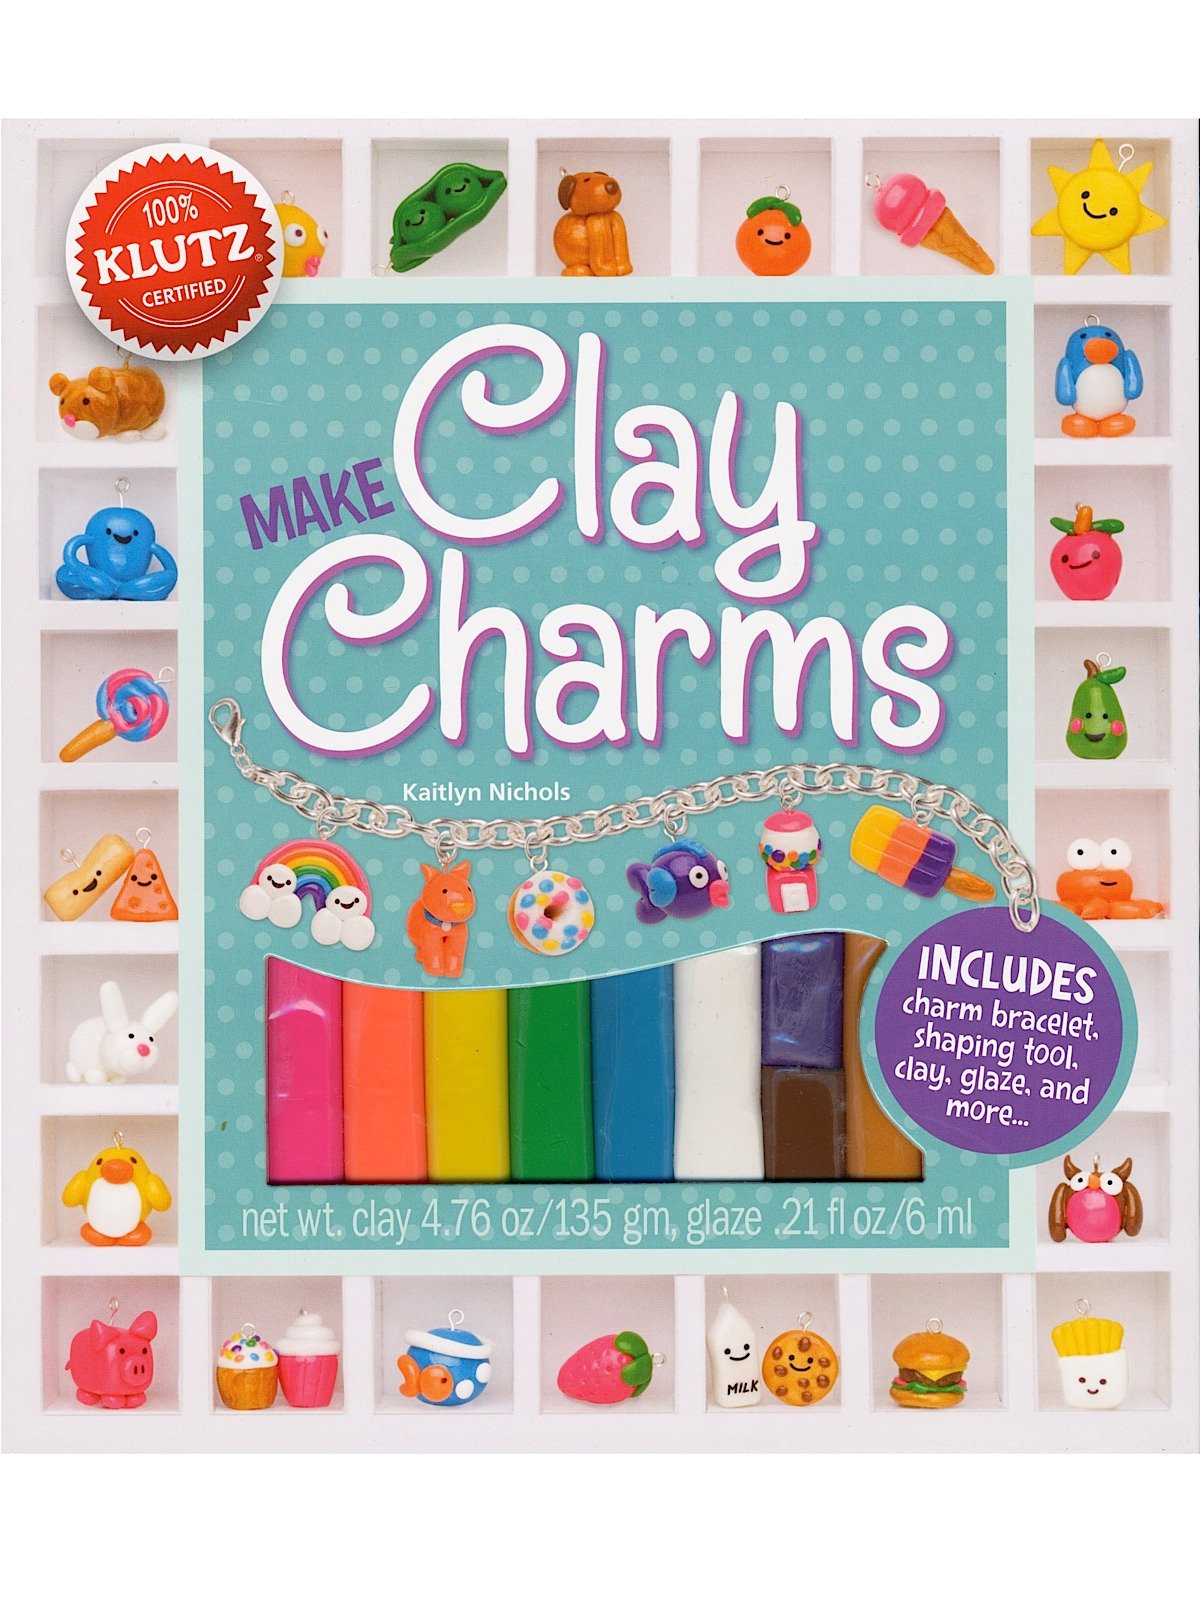 Make Clay Charms [Book]